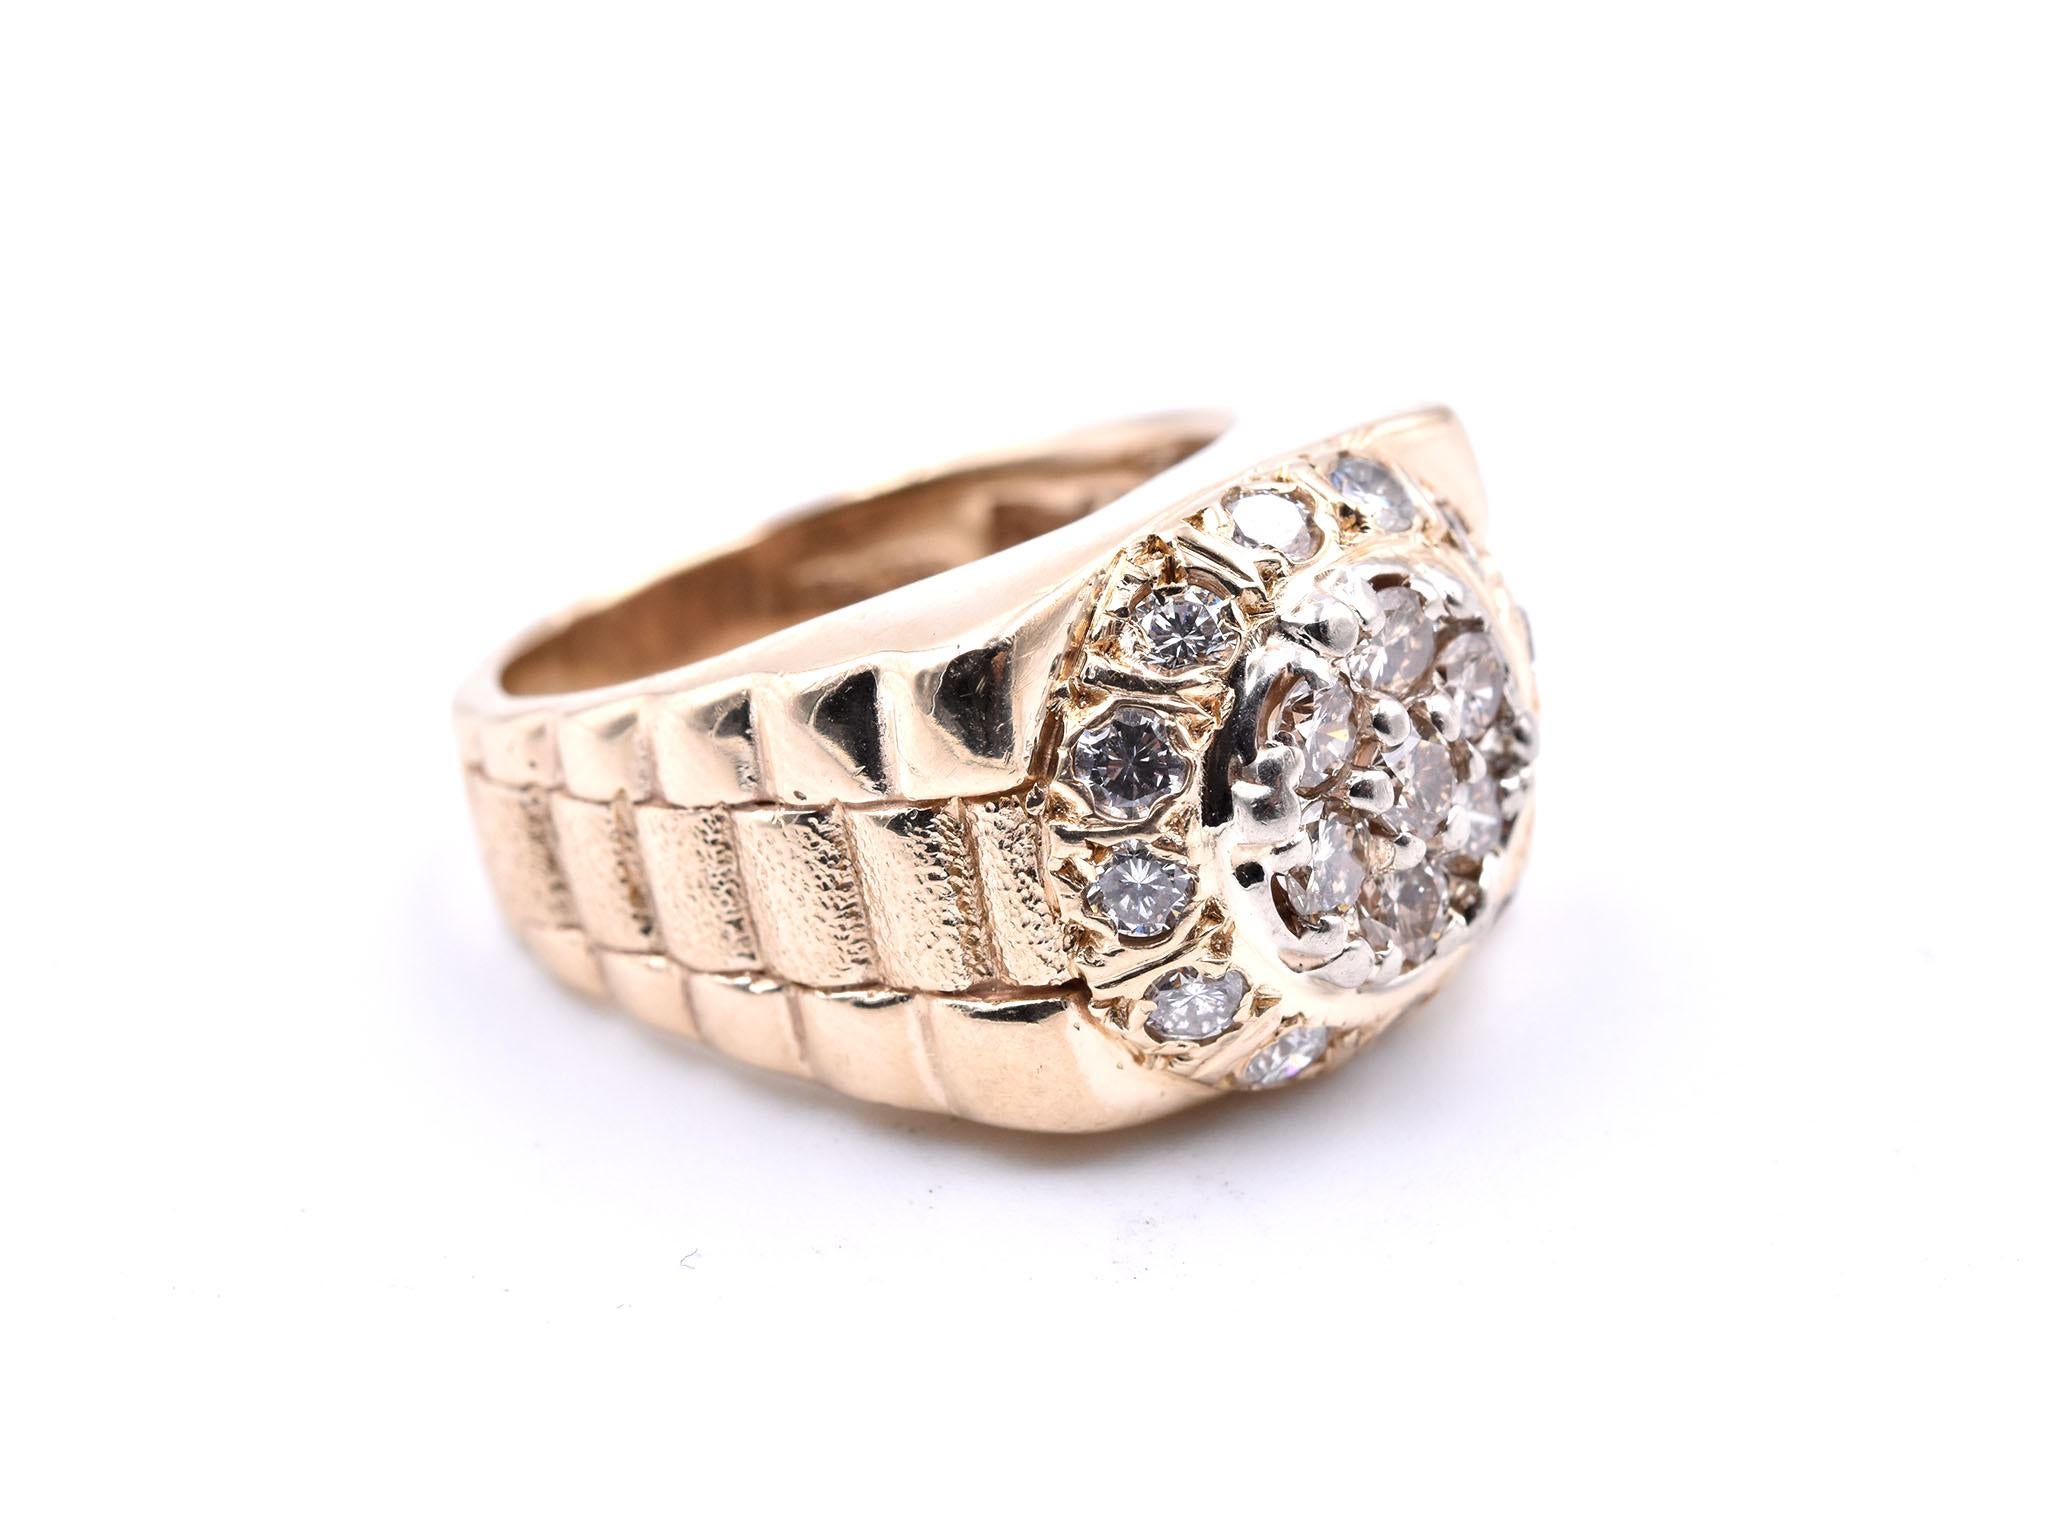 Designer: custom design
Material: 14k yellow gold
Diamonds: 19 round brilliant cut= 1.25cttw
Color: J
Clarity: SI1
Size: 8 1/4 (please allow two additional shipping days for sizing requests)
Dimensions: ring measures 22.5mm in width and 28.60mm in